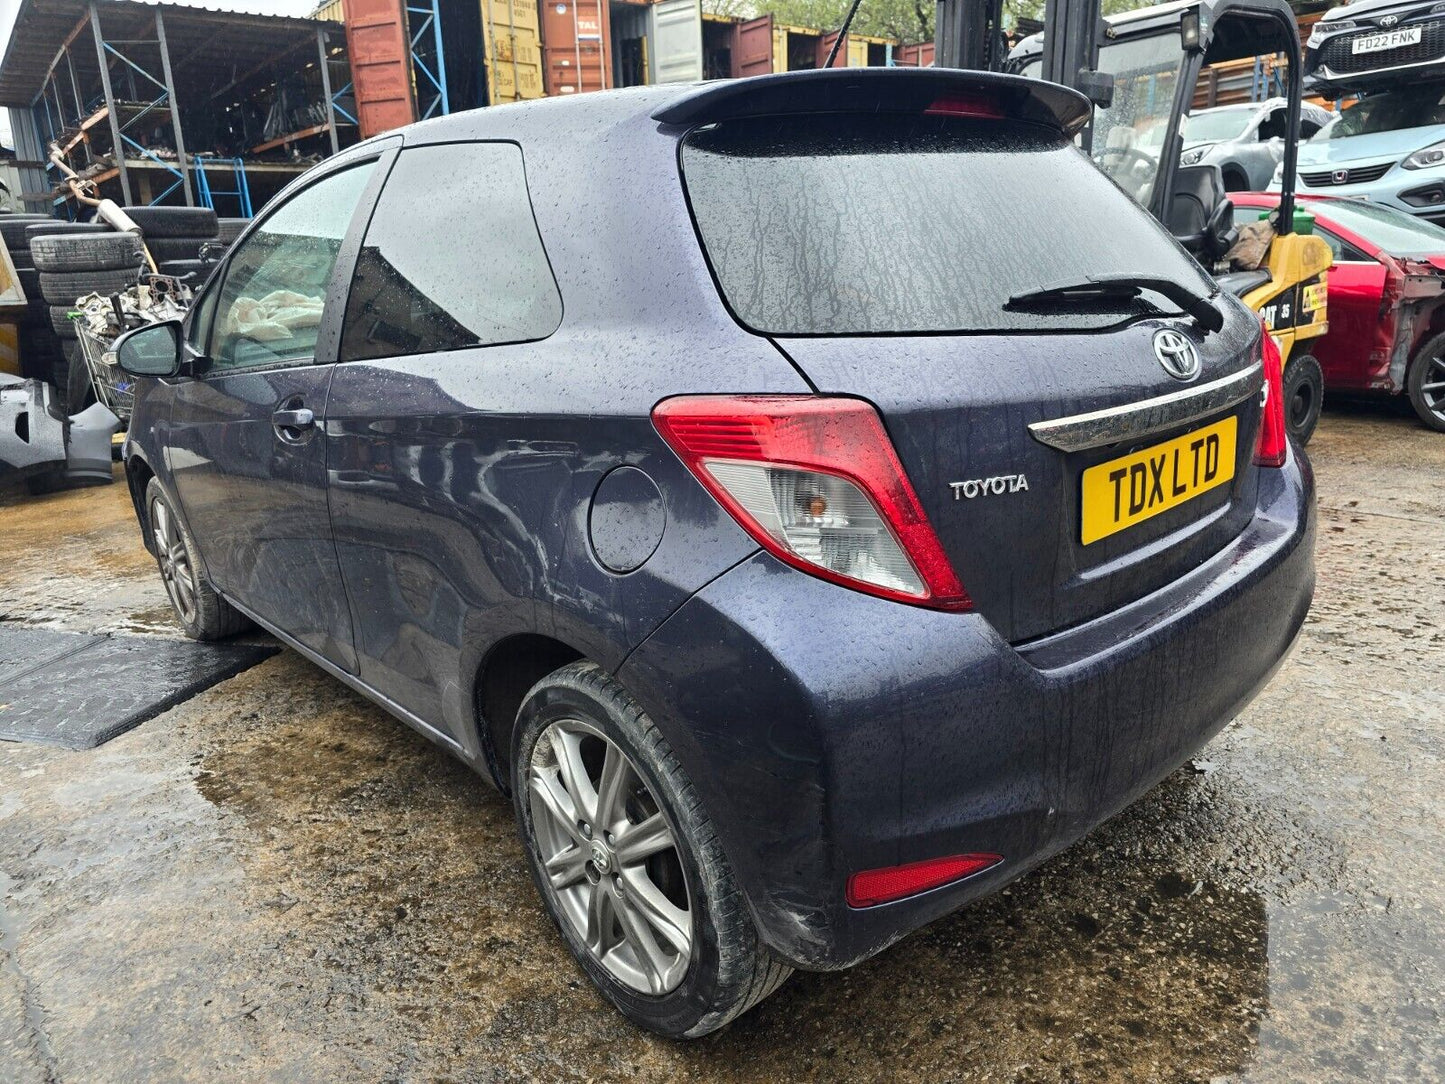 2012 TOYOTA YARIS SR NSP130 MK3 1.3 PETROL 3DR 6 SPEED MANUAL FOR PARTS & SPARES